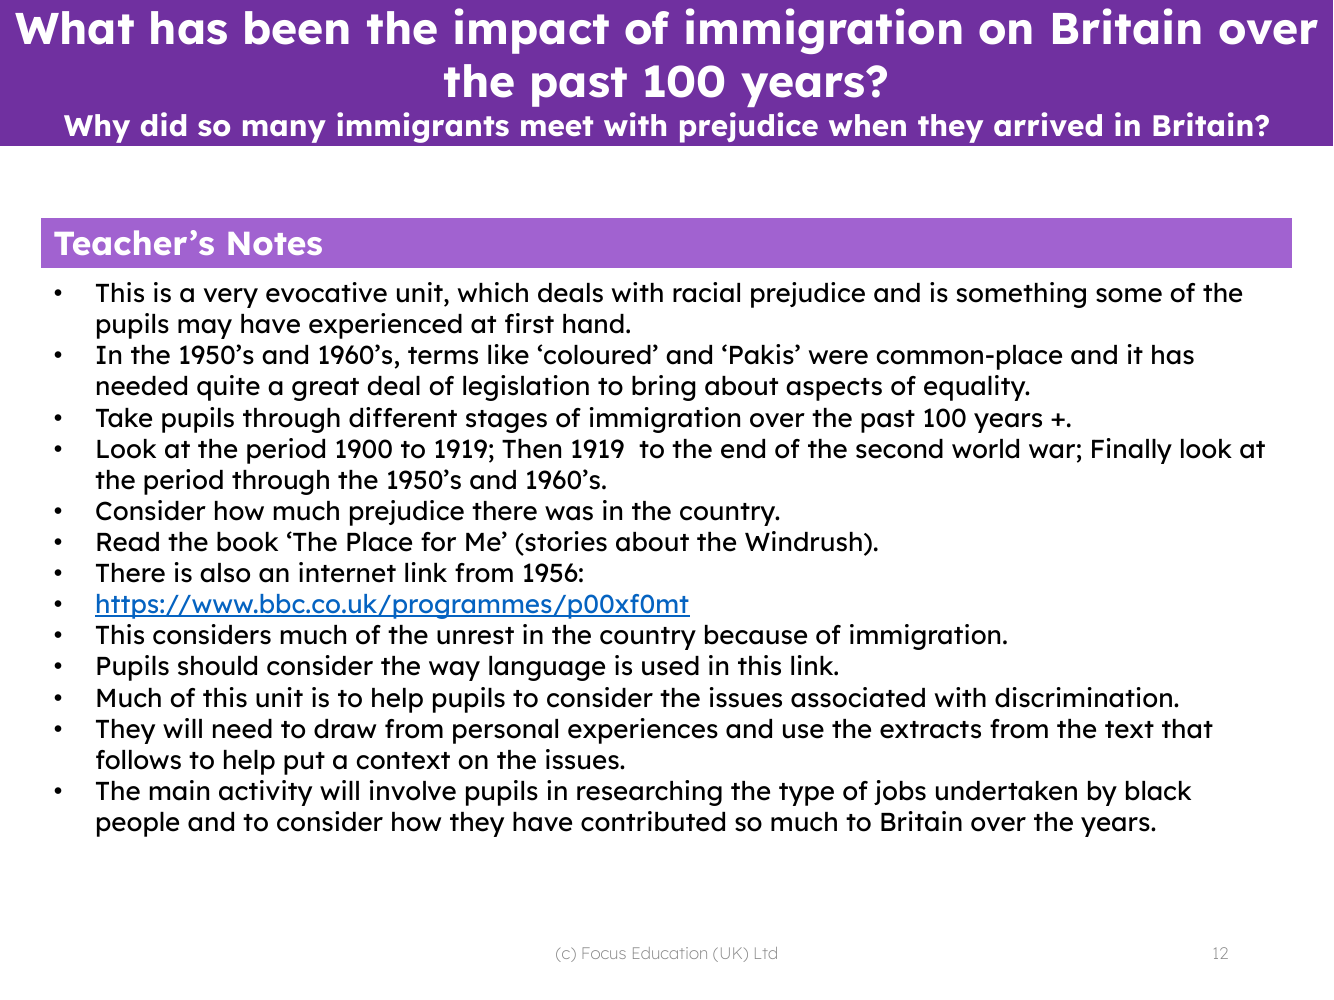 Why did so many immigrants meet with prejudice when they arrived in Britain? - Teacher notes